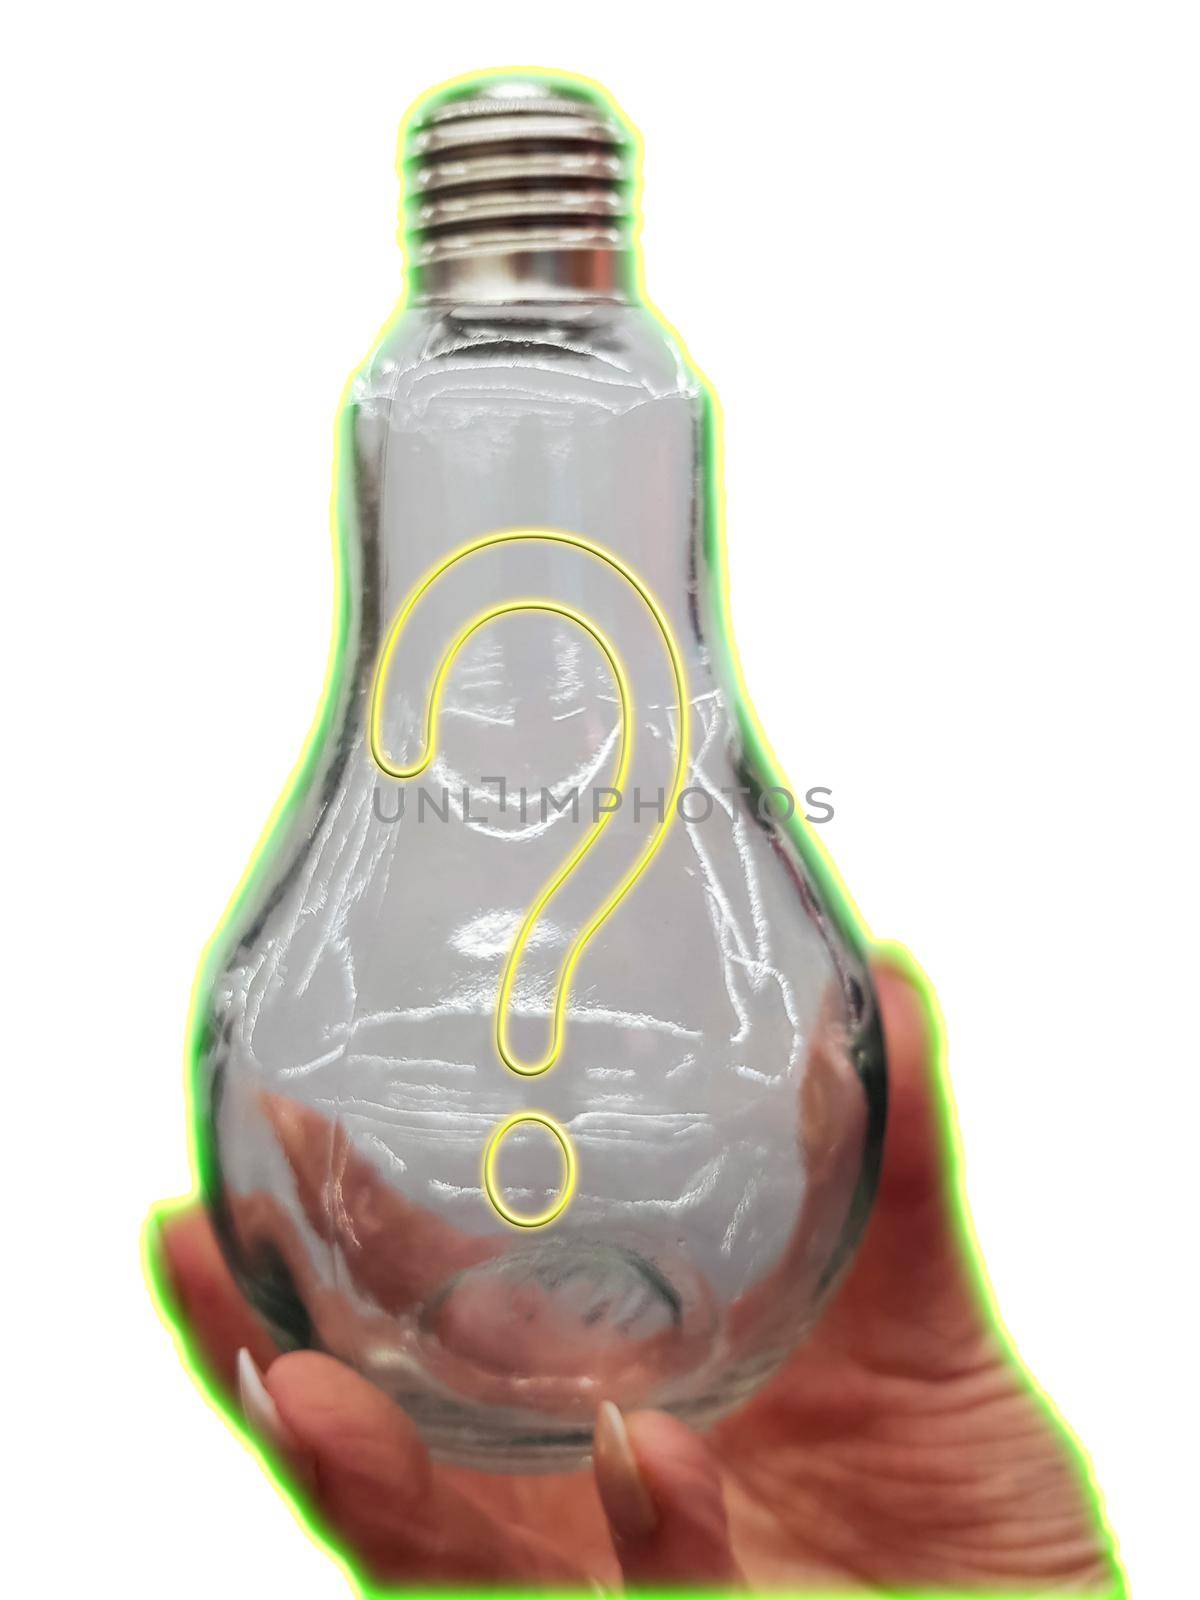 Lightbulb with yellow question marks                    by JFsPic